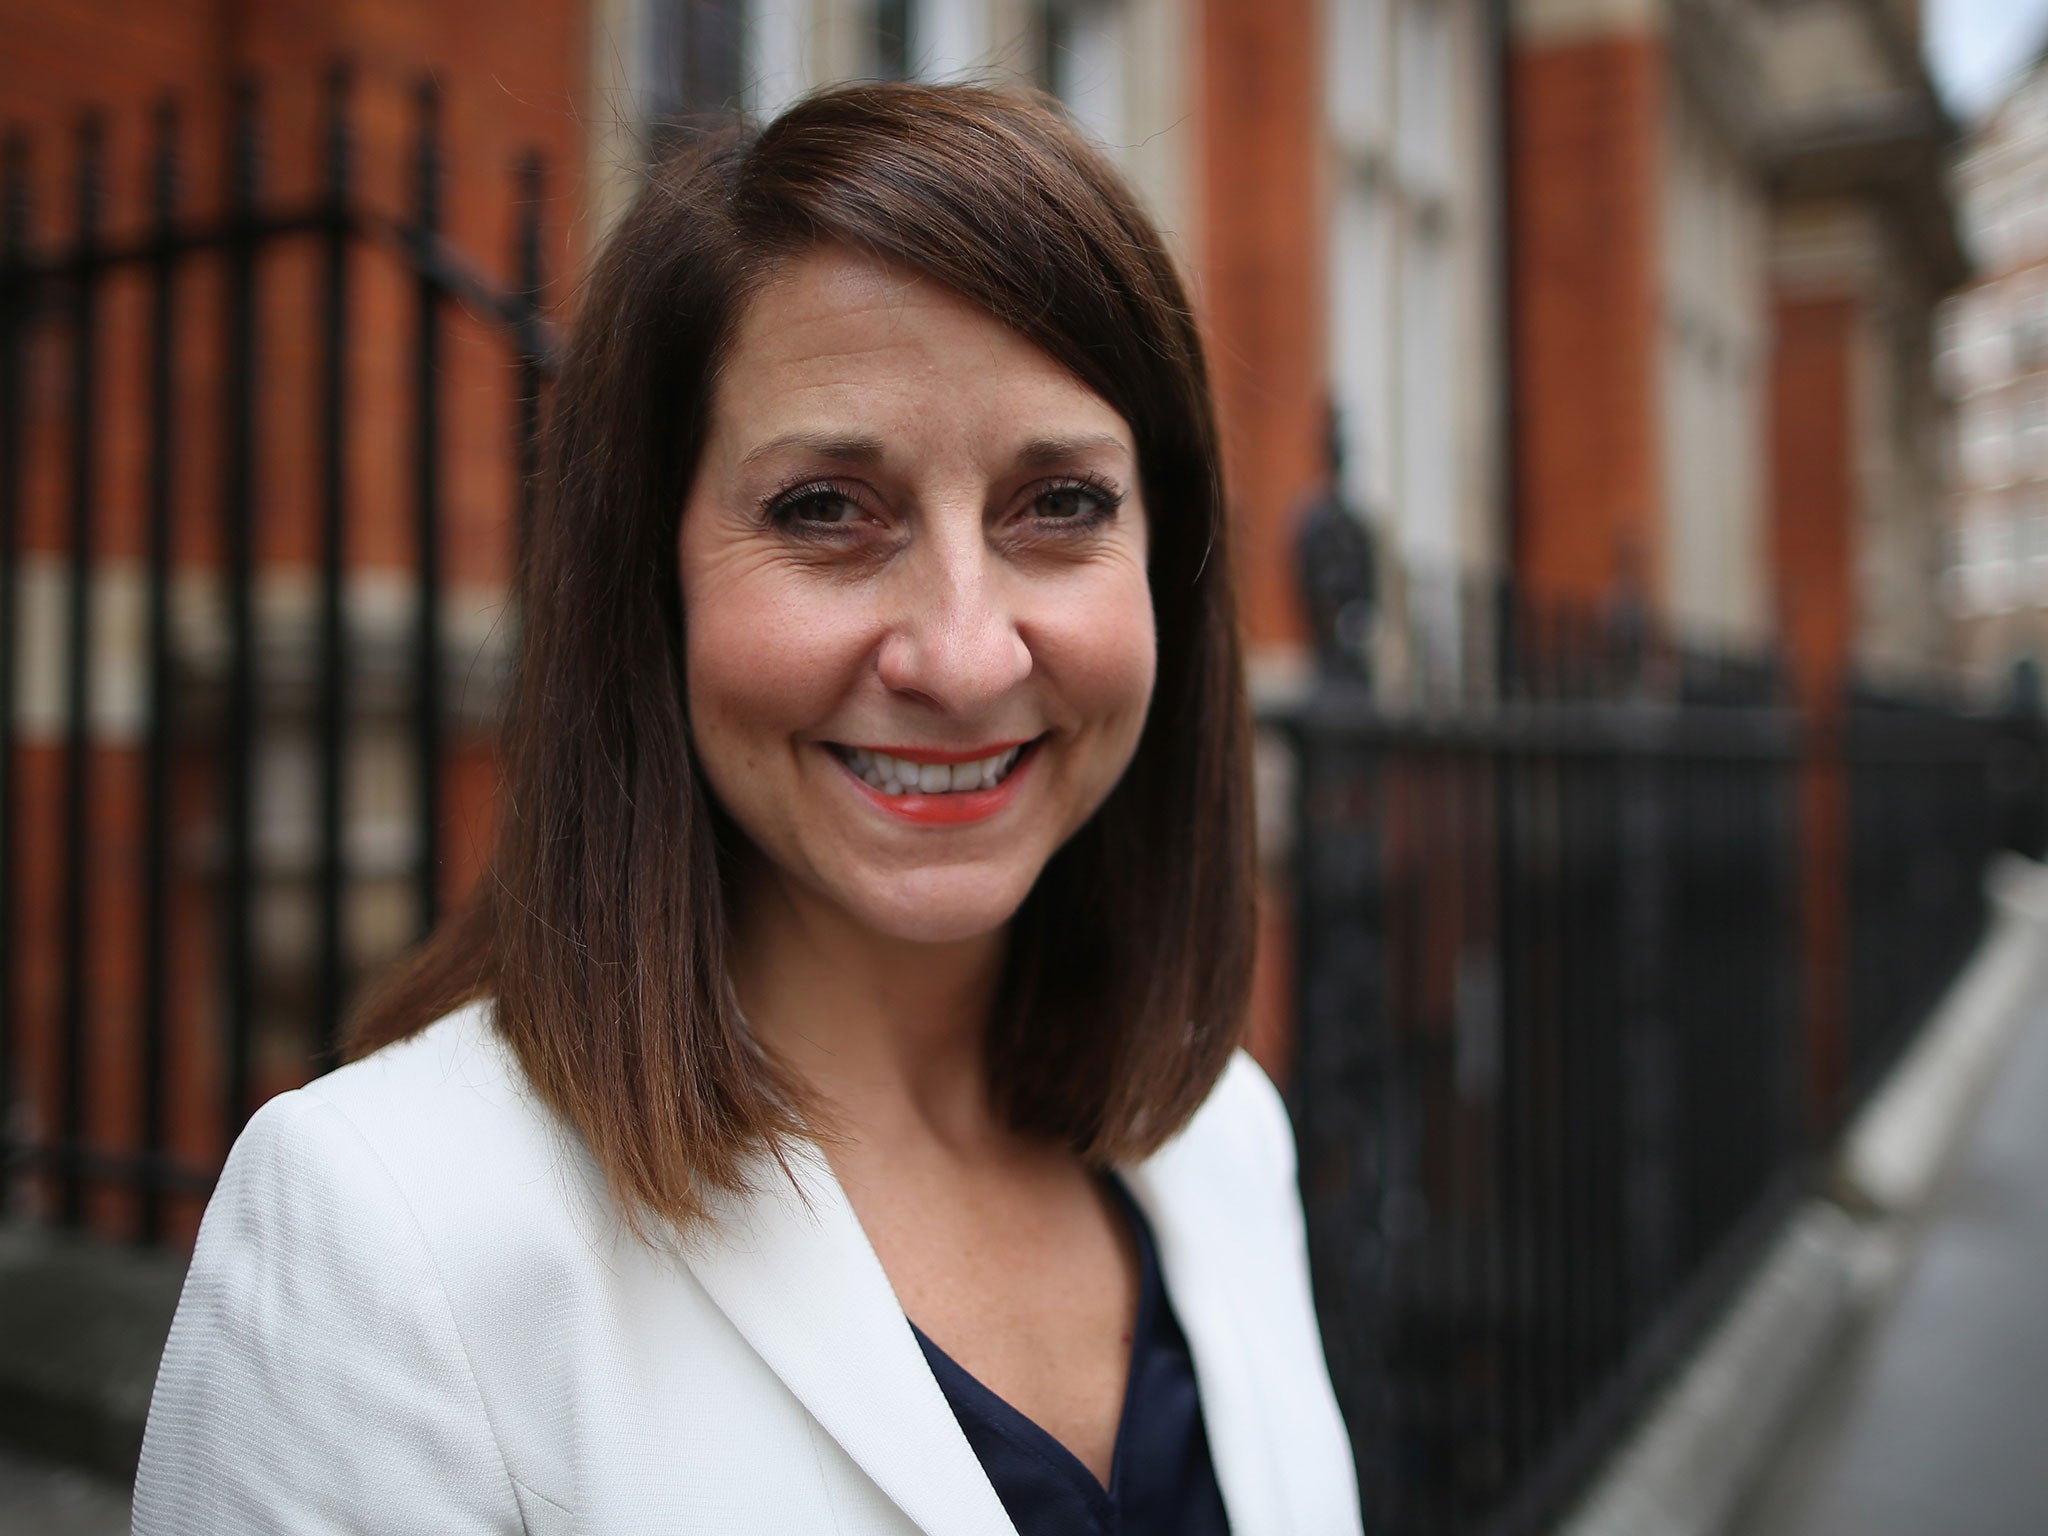 Liz Kendall is expected to come last in the leader vote